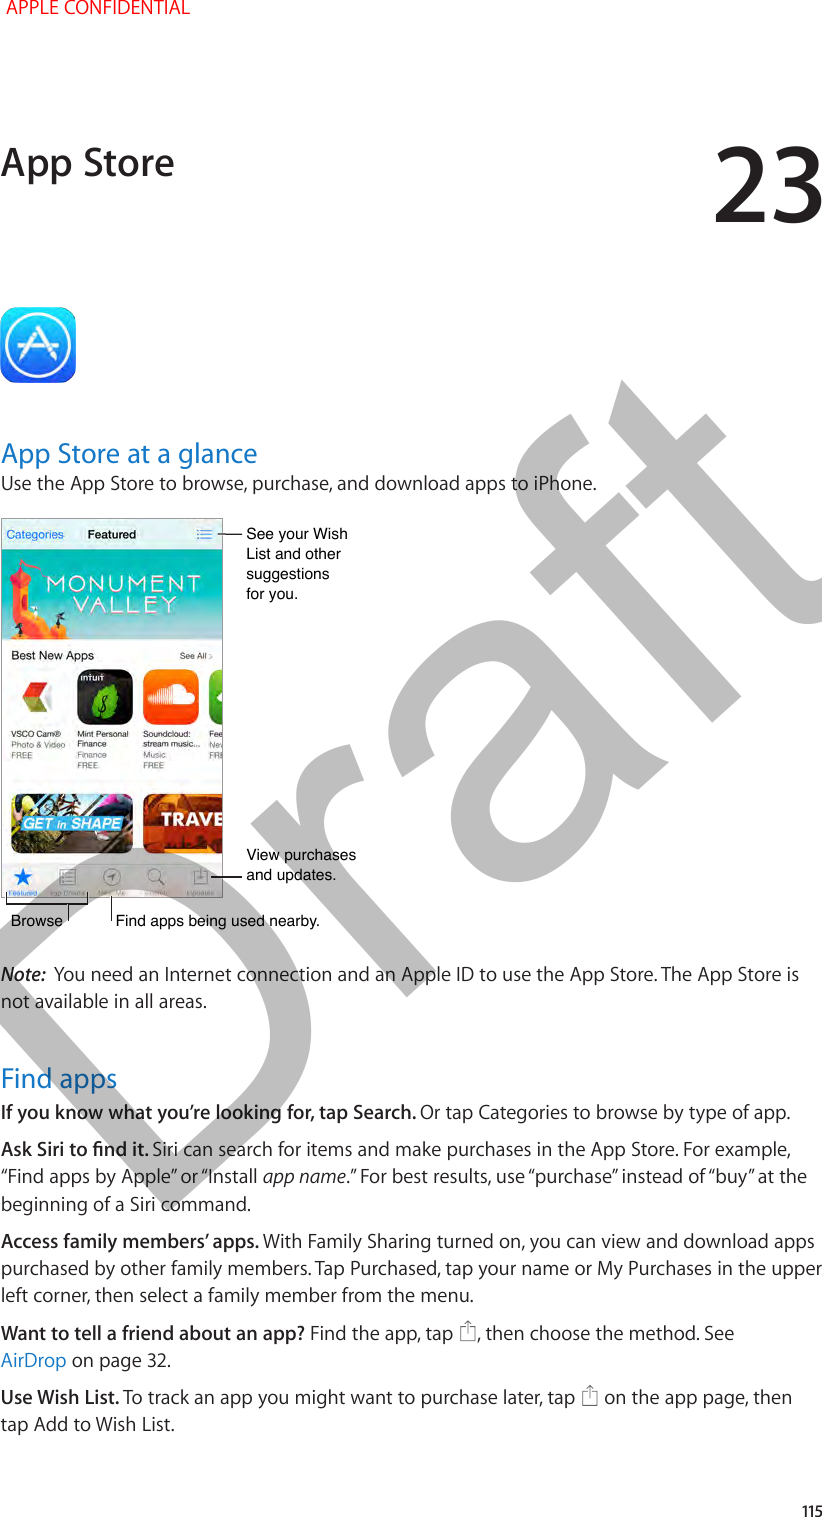 23   115App Store at a glanceUse the App Store to browse, purchase, and download apps to iPhone.View purchases and updates.View purchases and updates.BrowseBrowseFind apps being used nearby.Find apps being used nearby.See your Wish List and other suggestionsfor you.See your Wish List and other suggestionsfor you.Note:  You need an Internet connection and an Apple ID to use the App Store. The App Store is not available in all areas.Find appsIf you know what you’re looking for, tap Search. Or tap Categories to browse by type of app.Siri can search for items and make purchases in the App Store. For example, app namebeginning of a Siri command.Access family members’ apps. With Family Sharing turned on, you can view and download apps purchased by other family members. Tap Purchased, tap your name or My Purchases in the upper left corner, then select a family member from the menu.Want to tell a friend about an app? Find the app, tap  , then choose the method. See AirDrop on page 32.Use Wish List. To track an app you might want to purchase later, tap   on the app page, then tap Add to Wish List.App Store APPLE CONFIDENTIALDraft